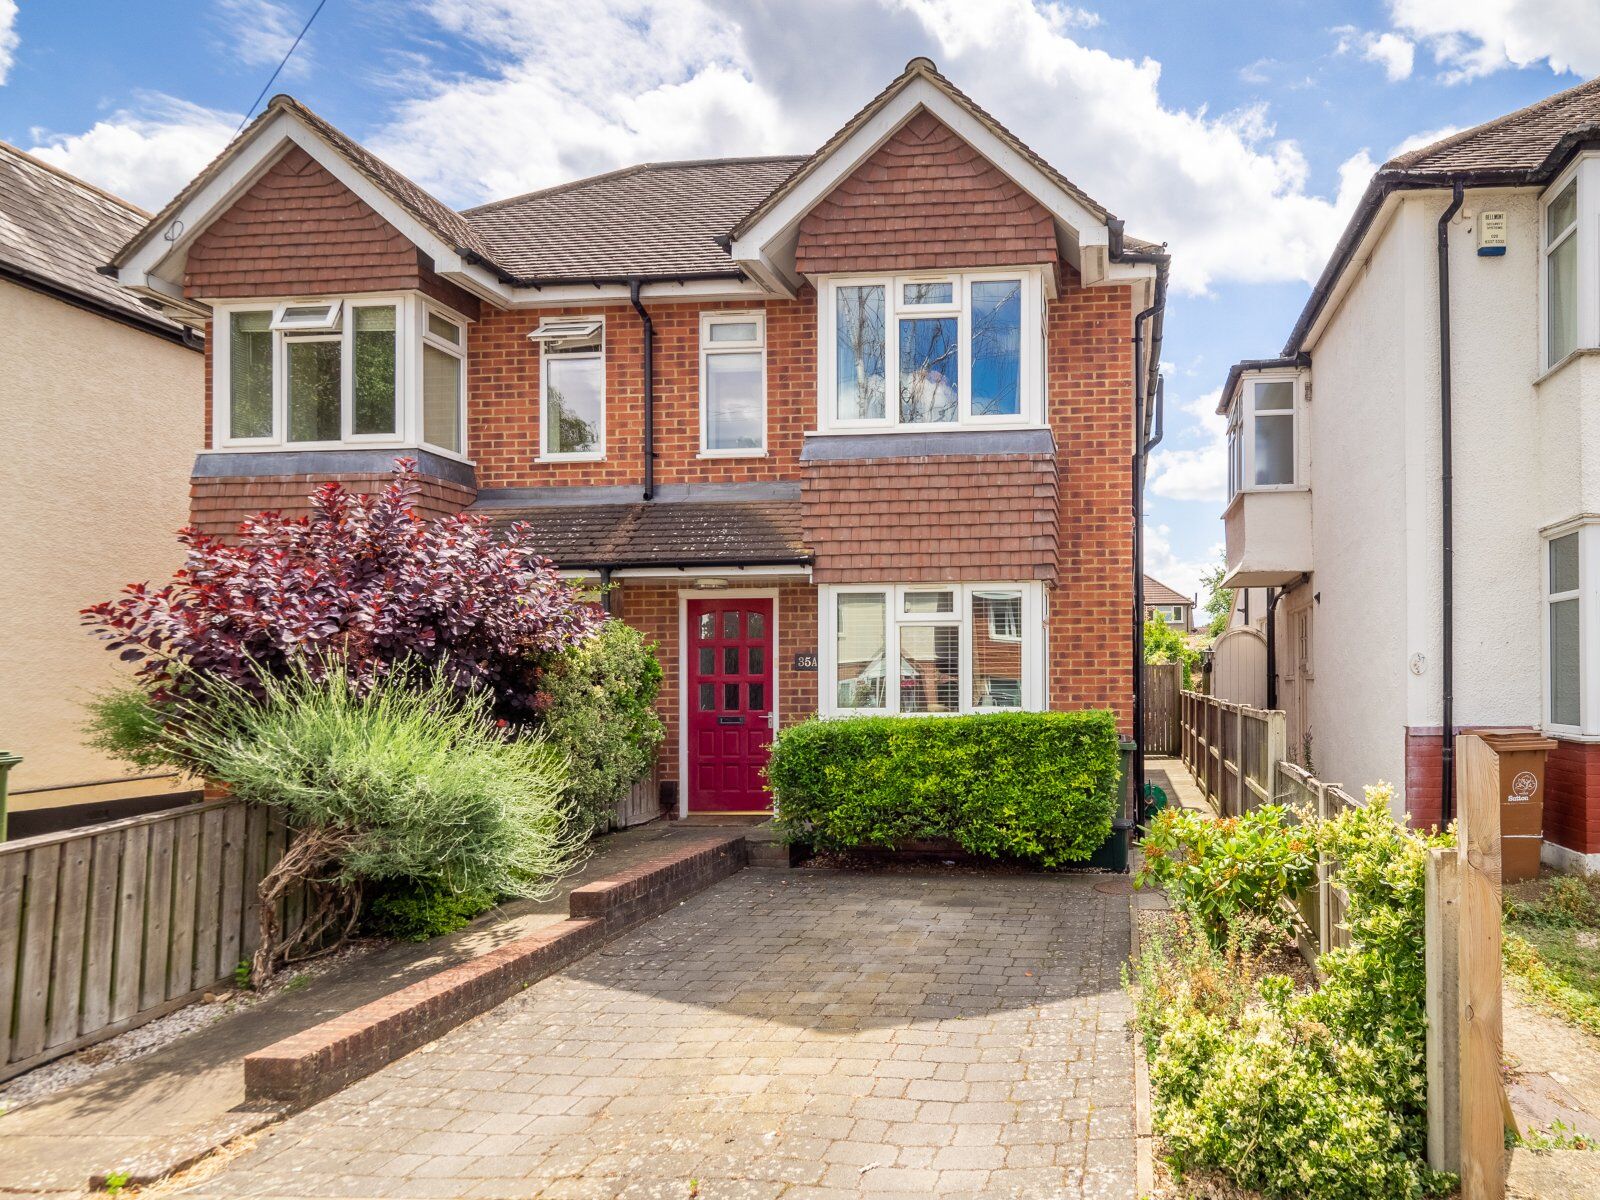 2 bedroom semi detached house for sale St Albans Road, Cheam, SM1, main image